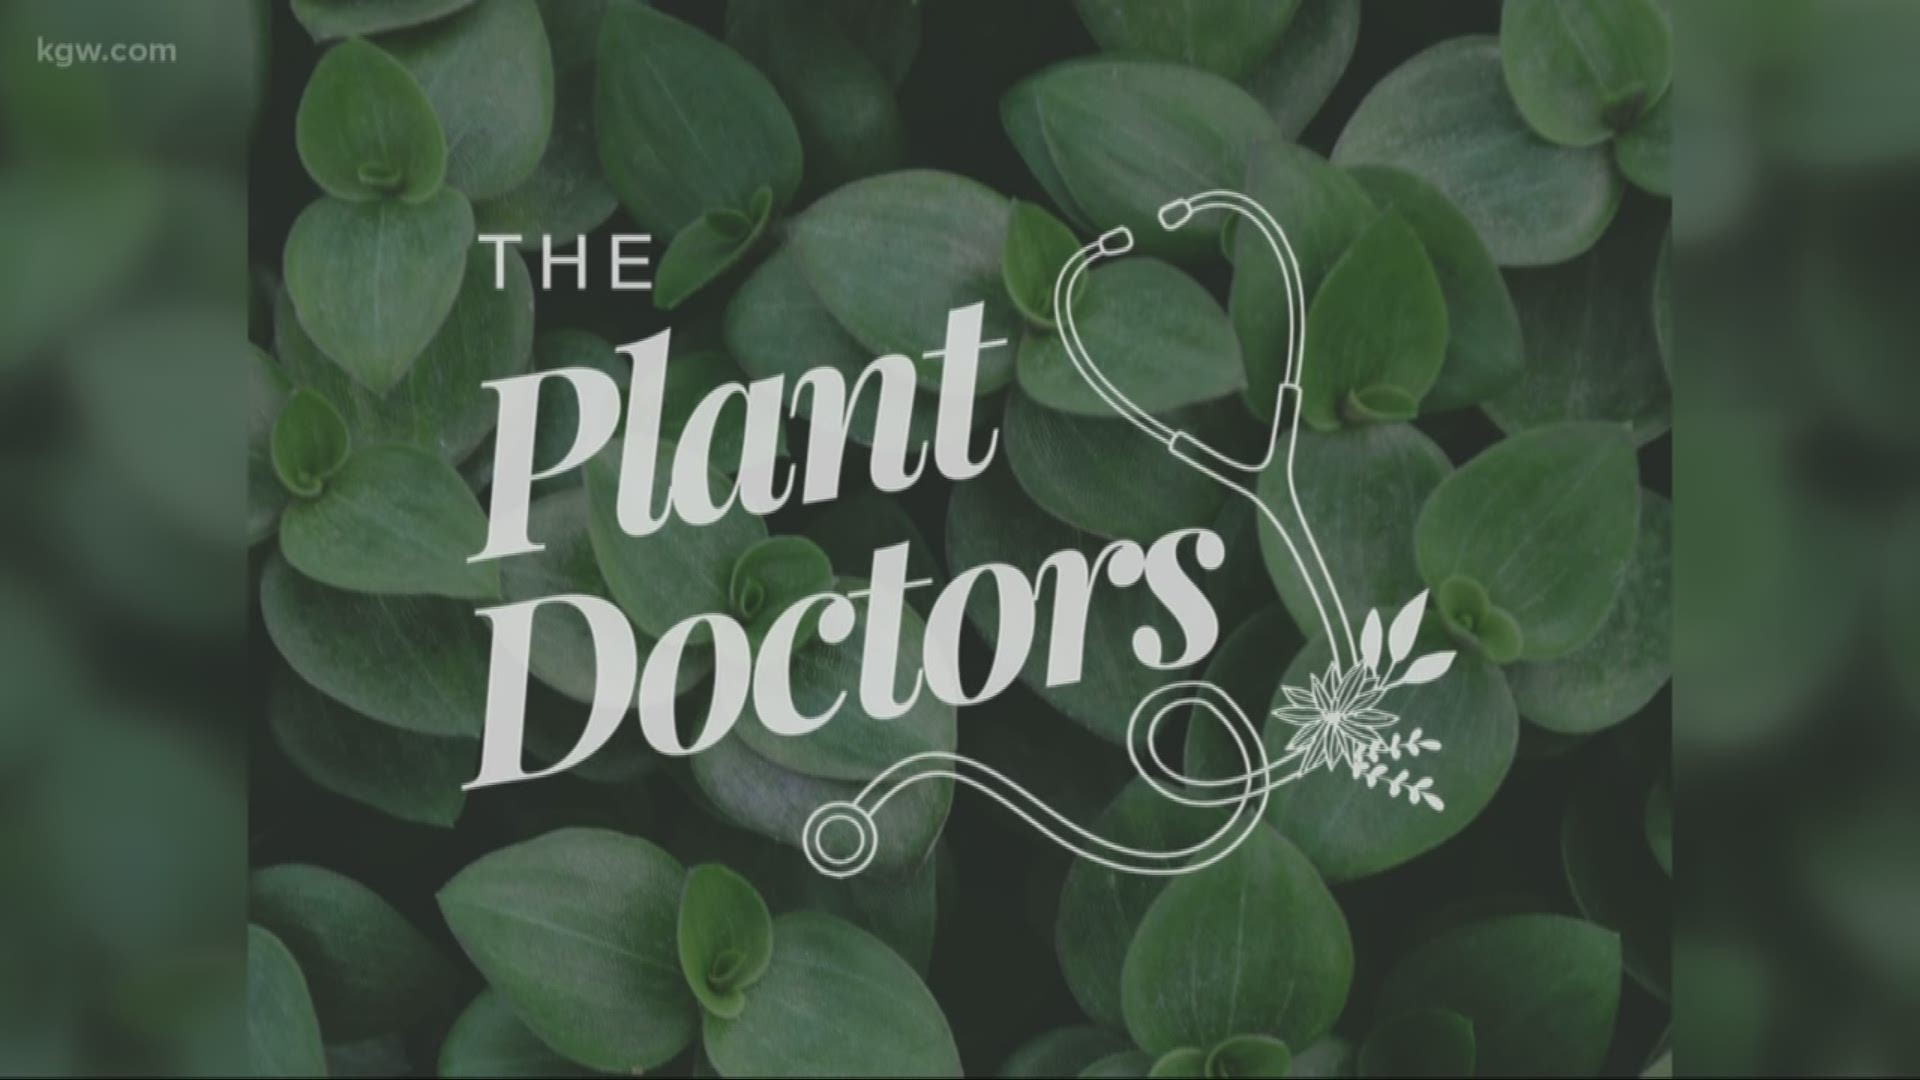 The Plant Doctors are holding an open house to teach you how to re-pot your plants for spring.
theplantdocs.com
#TonightwithCassidy